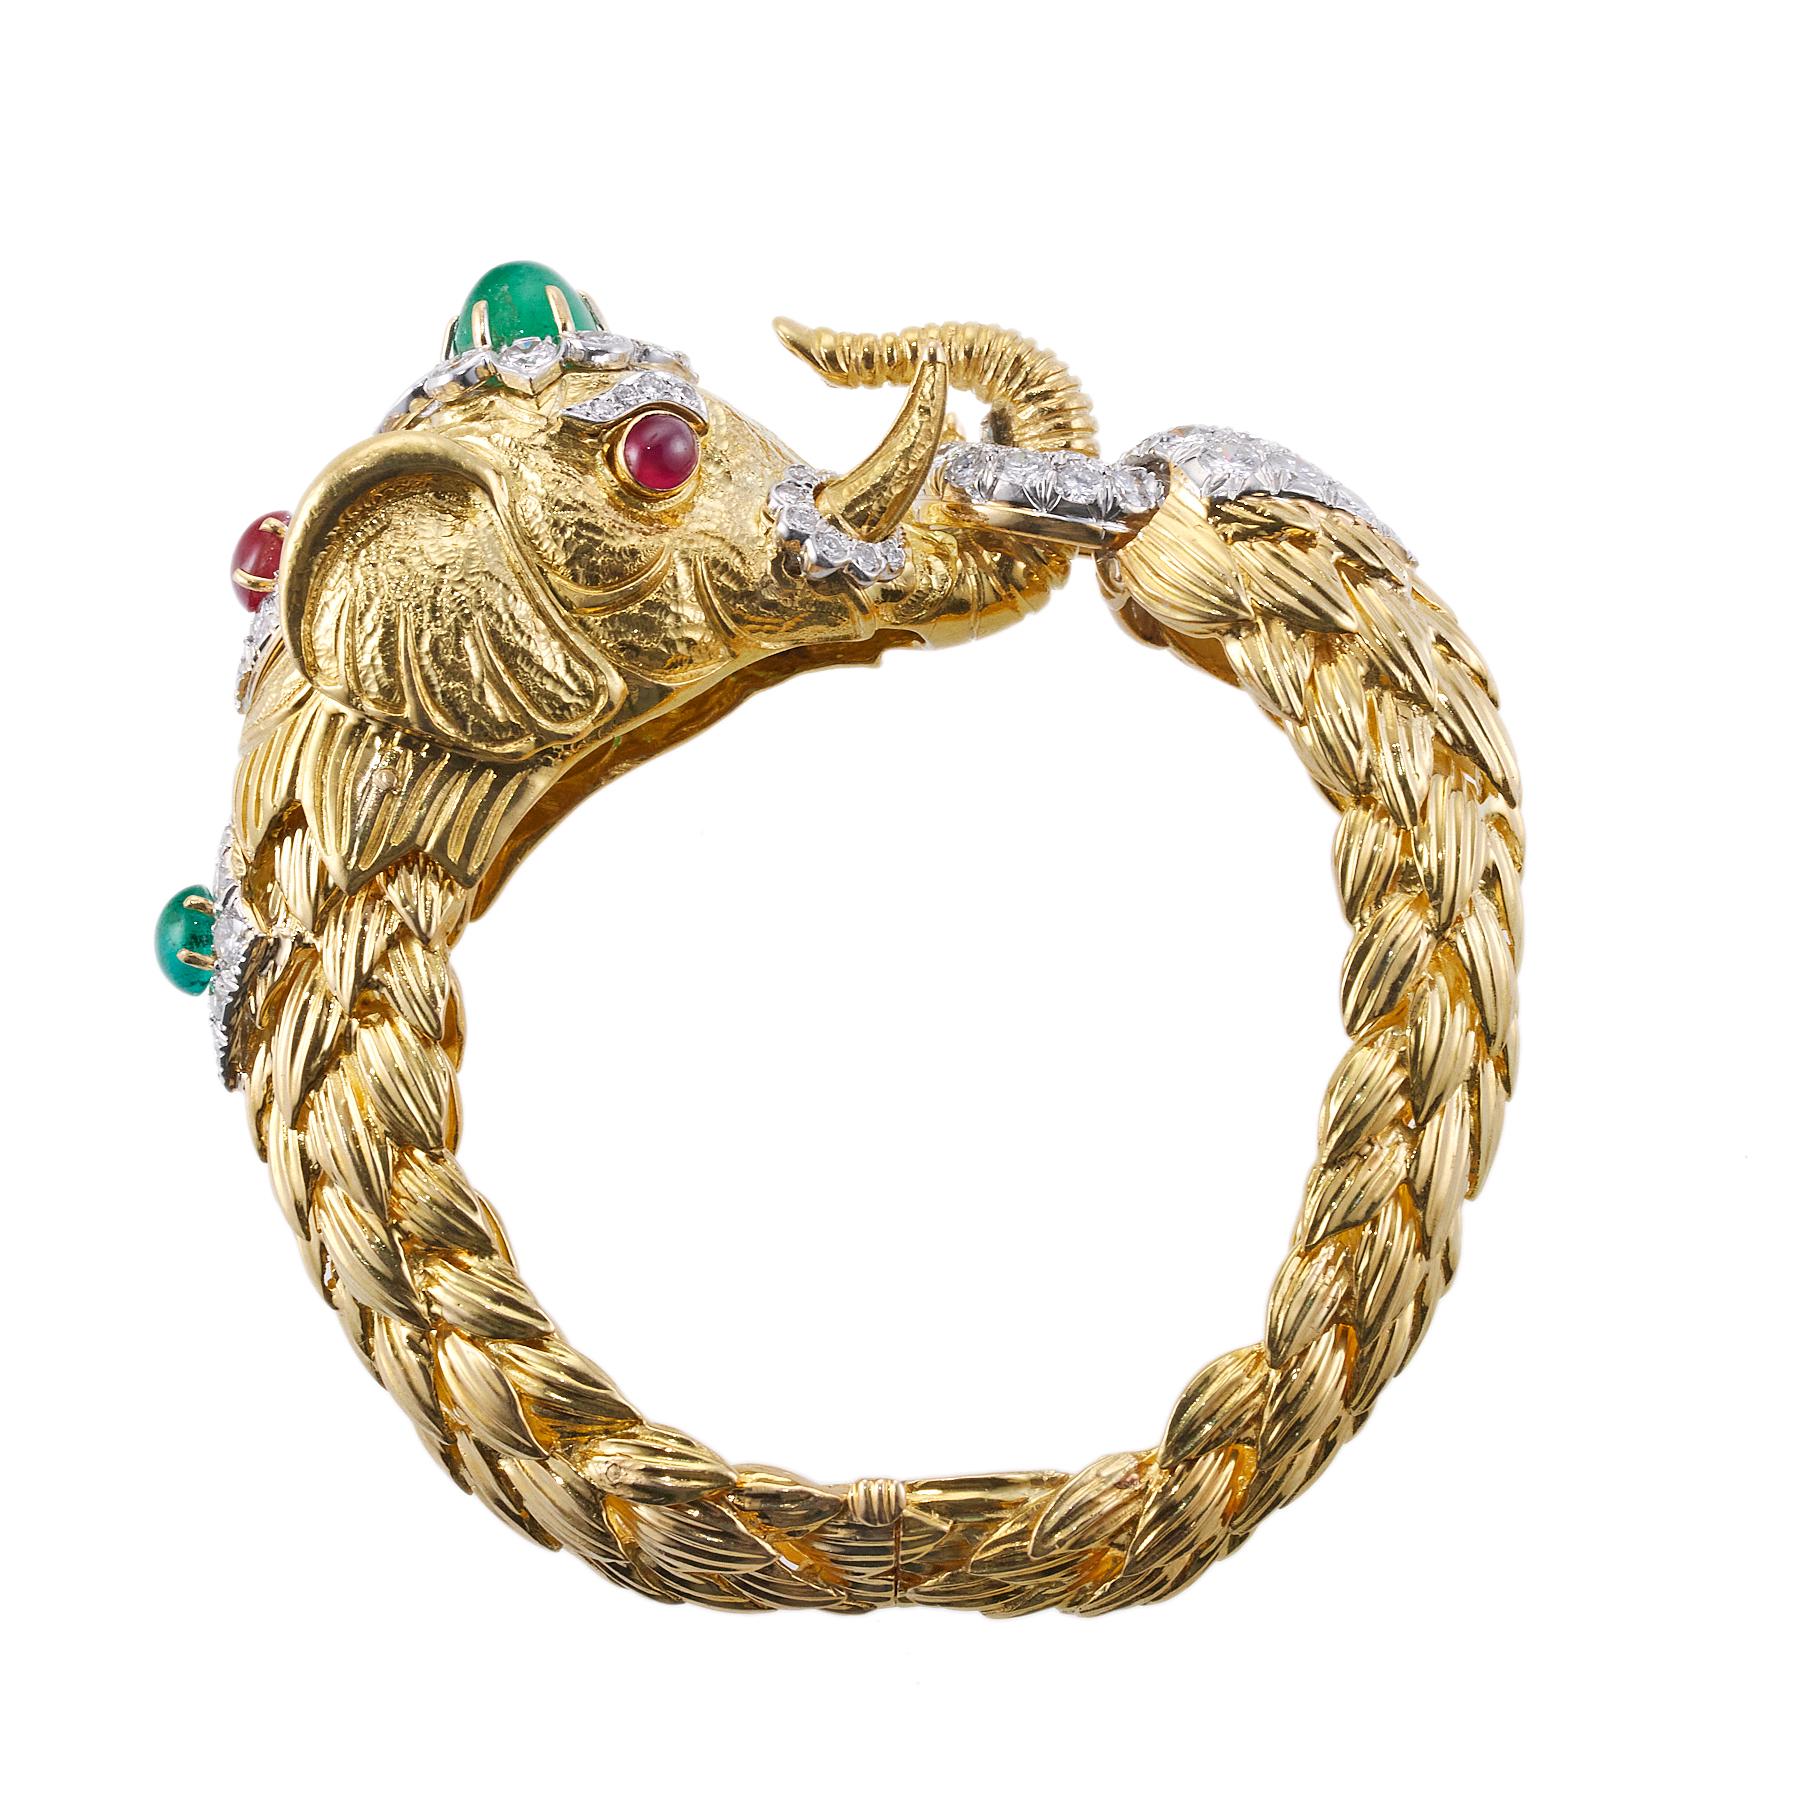 Exquisite David Webb elephant bracelet, set in 18K gold and platinum, with approx. 5.00 ctw in VS-SI/H diamonds, cabochon ruby and cabochon emeralds. Bracelet will fit an approx. 7